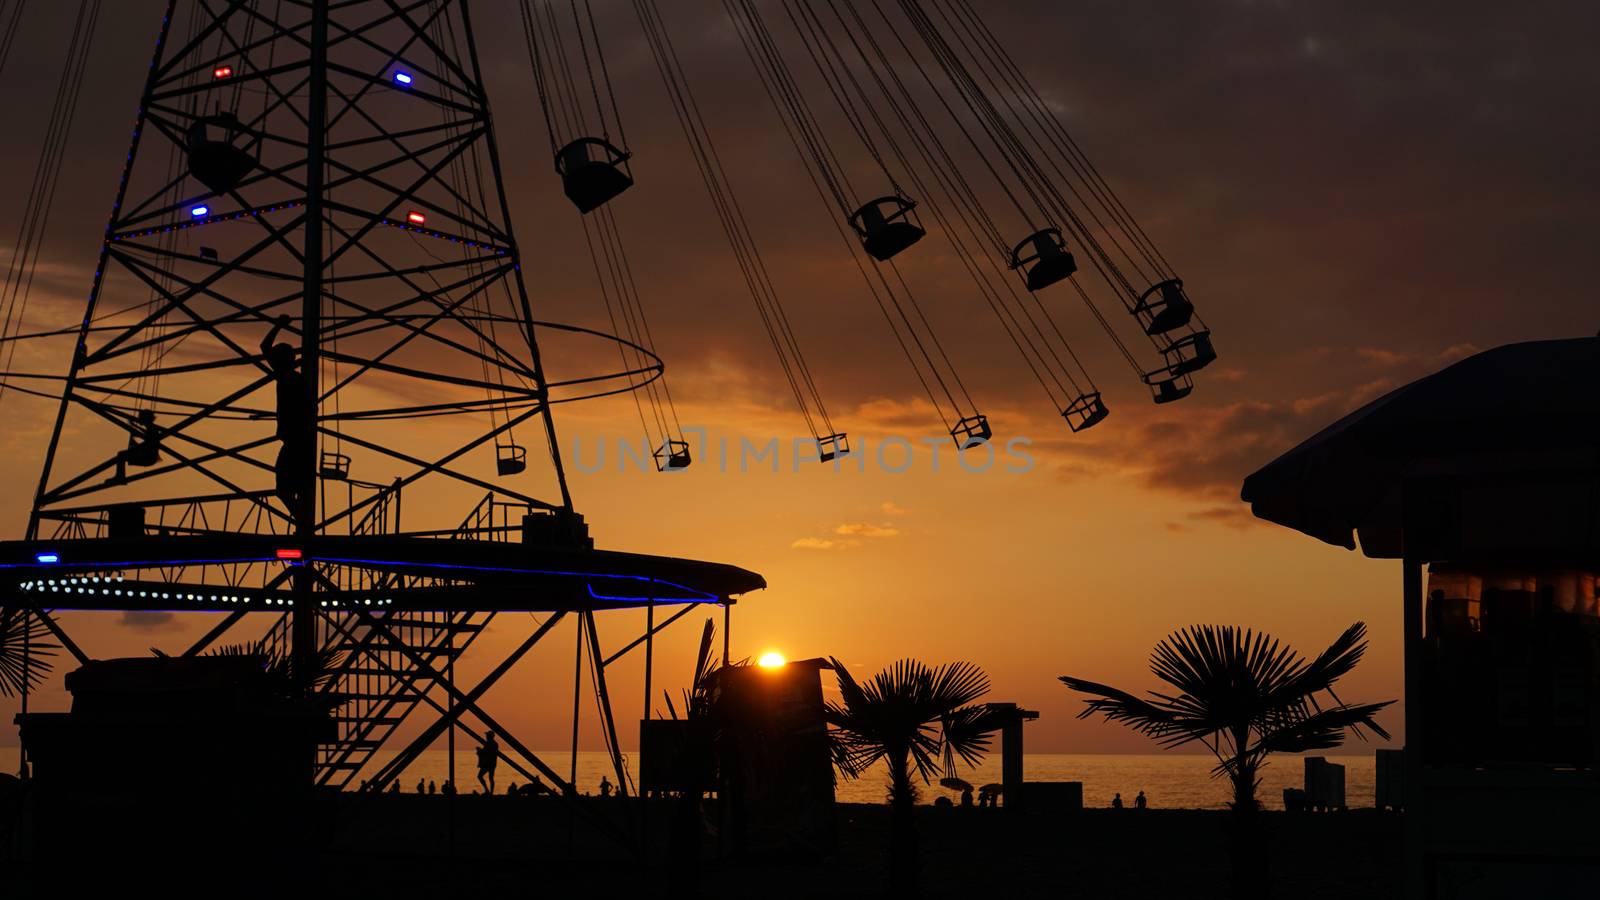 Swinging carousel roundabout chain ride at sunset by natali_brill